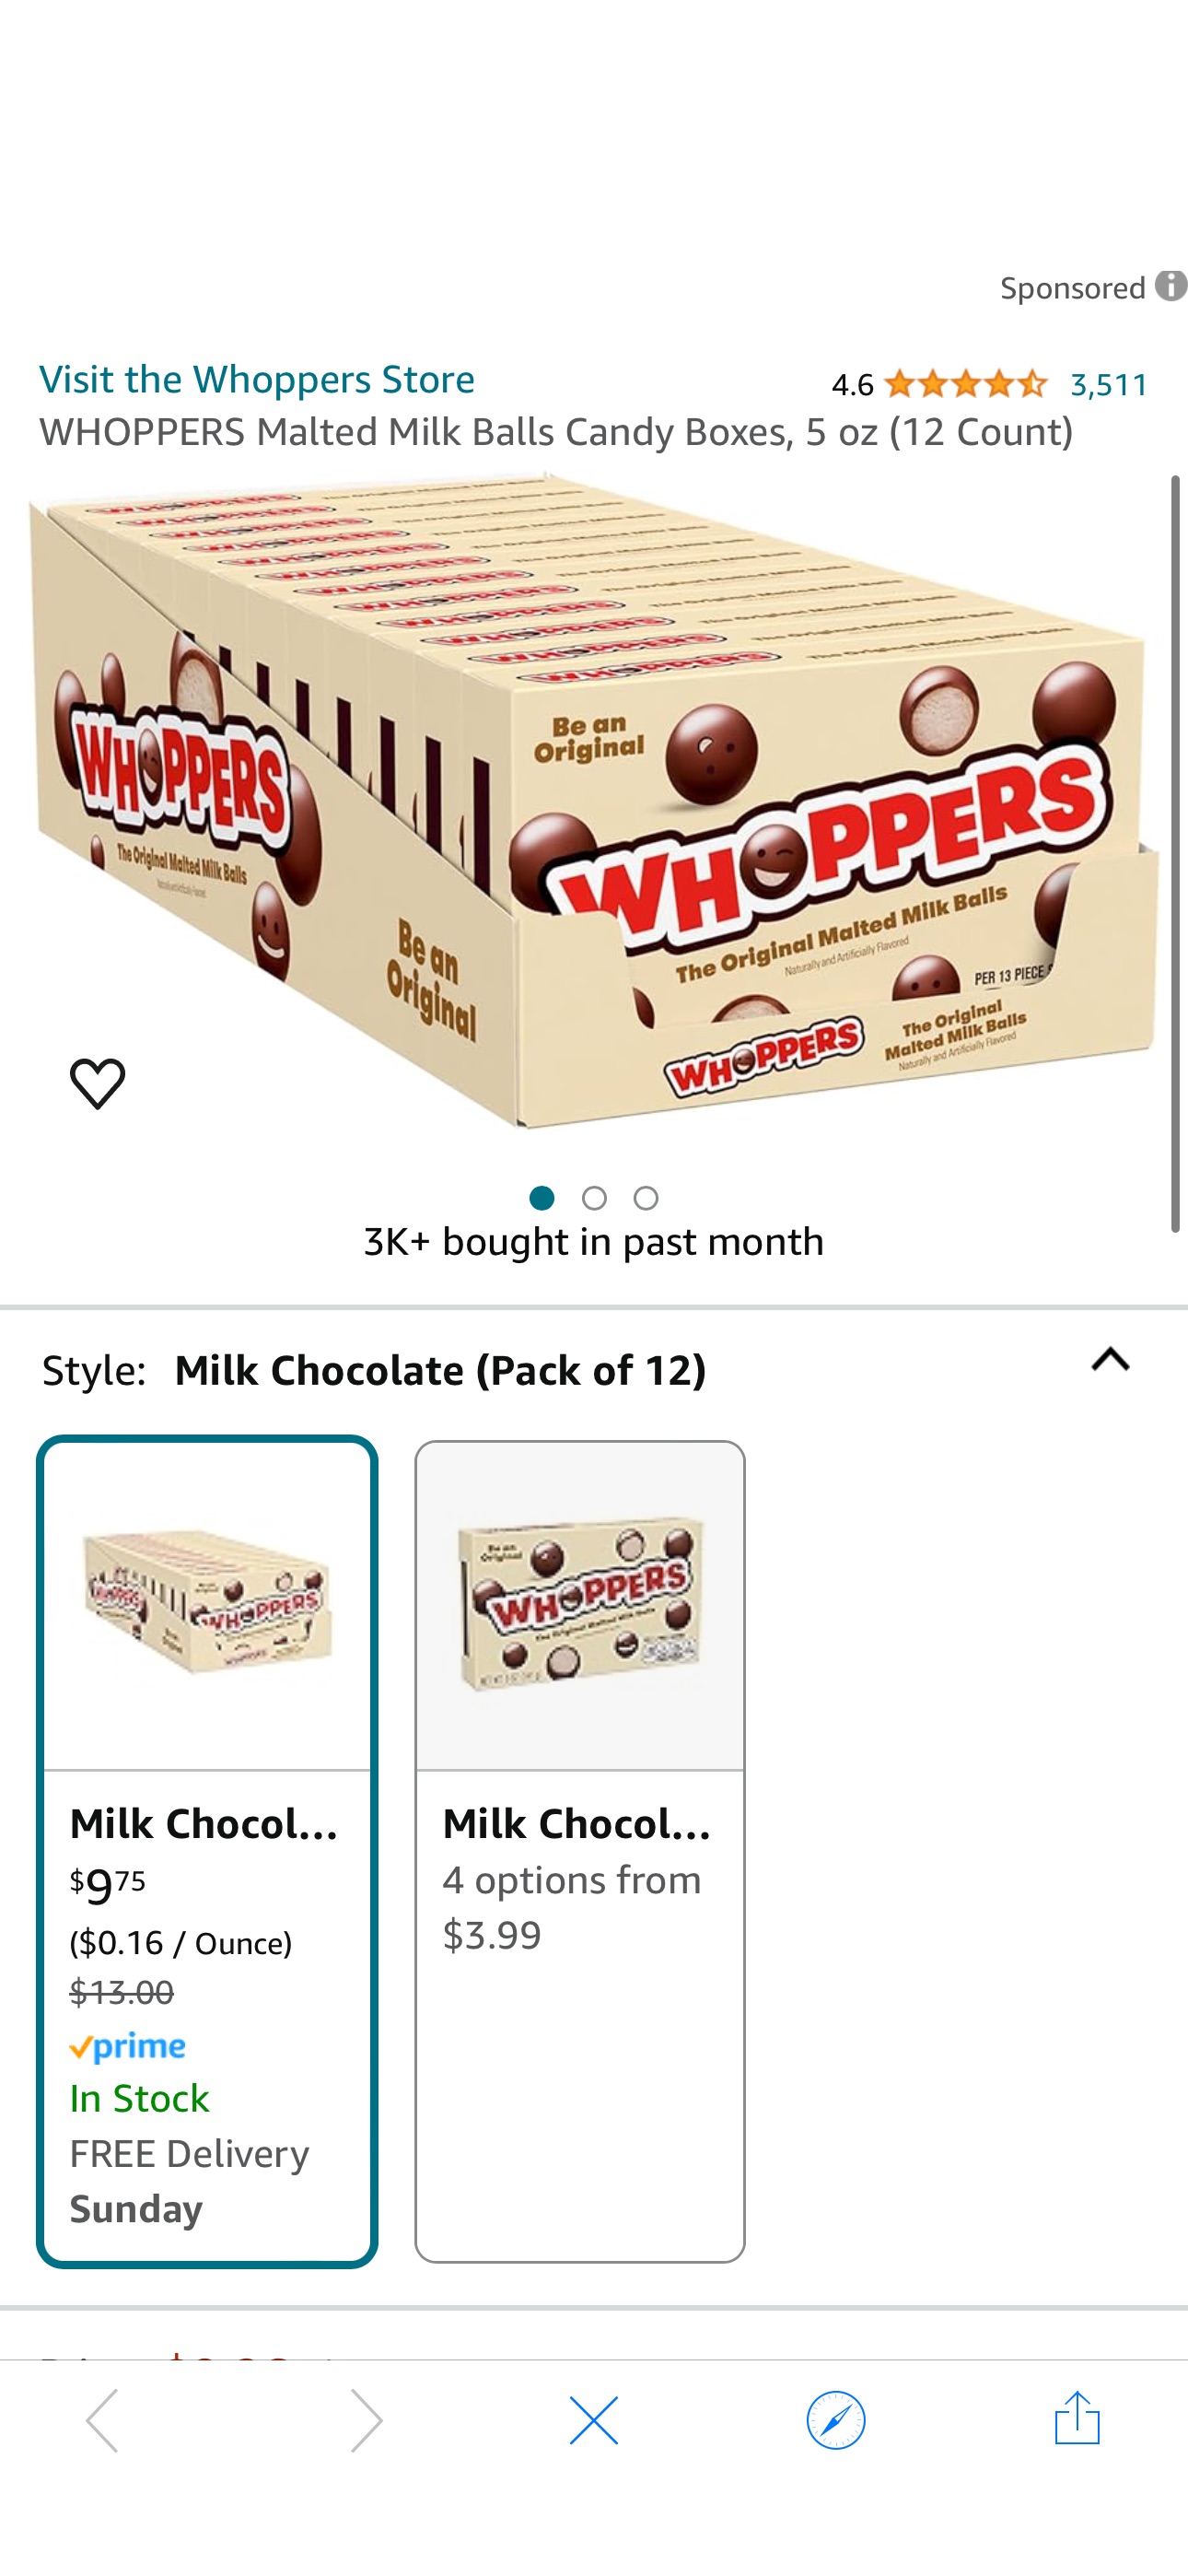 Amazon.com: WHOPPERS Malted Milk Balls Candy Boxes, 5 oz (12 Count) : Grocery & Gourmet Food